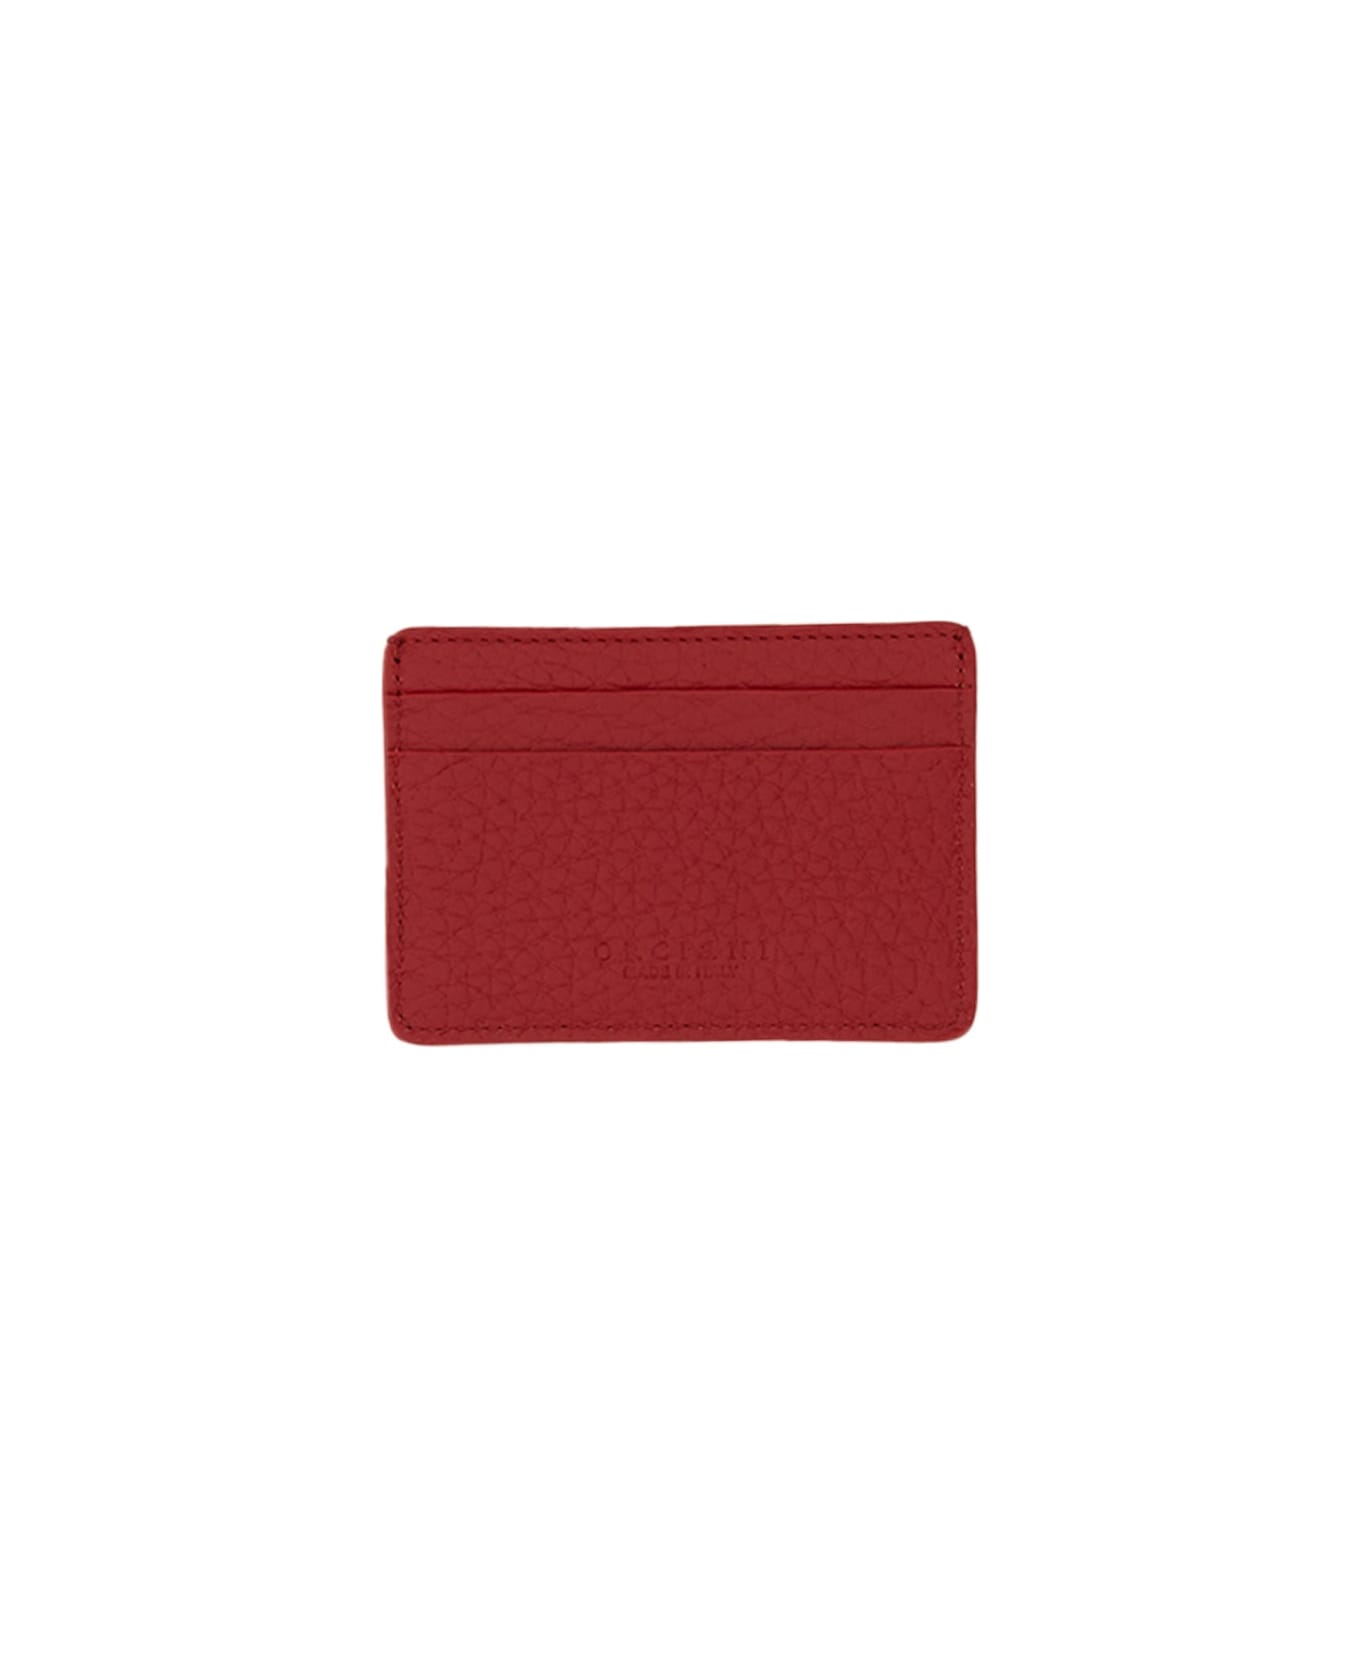 Orciani Soft Card Holder - RED